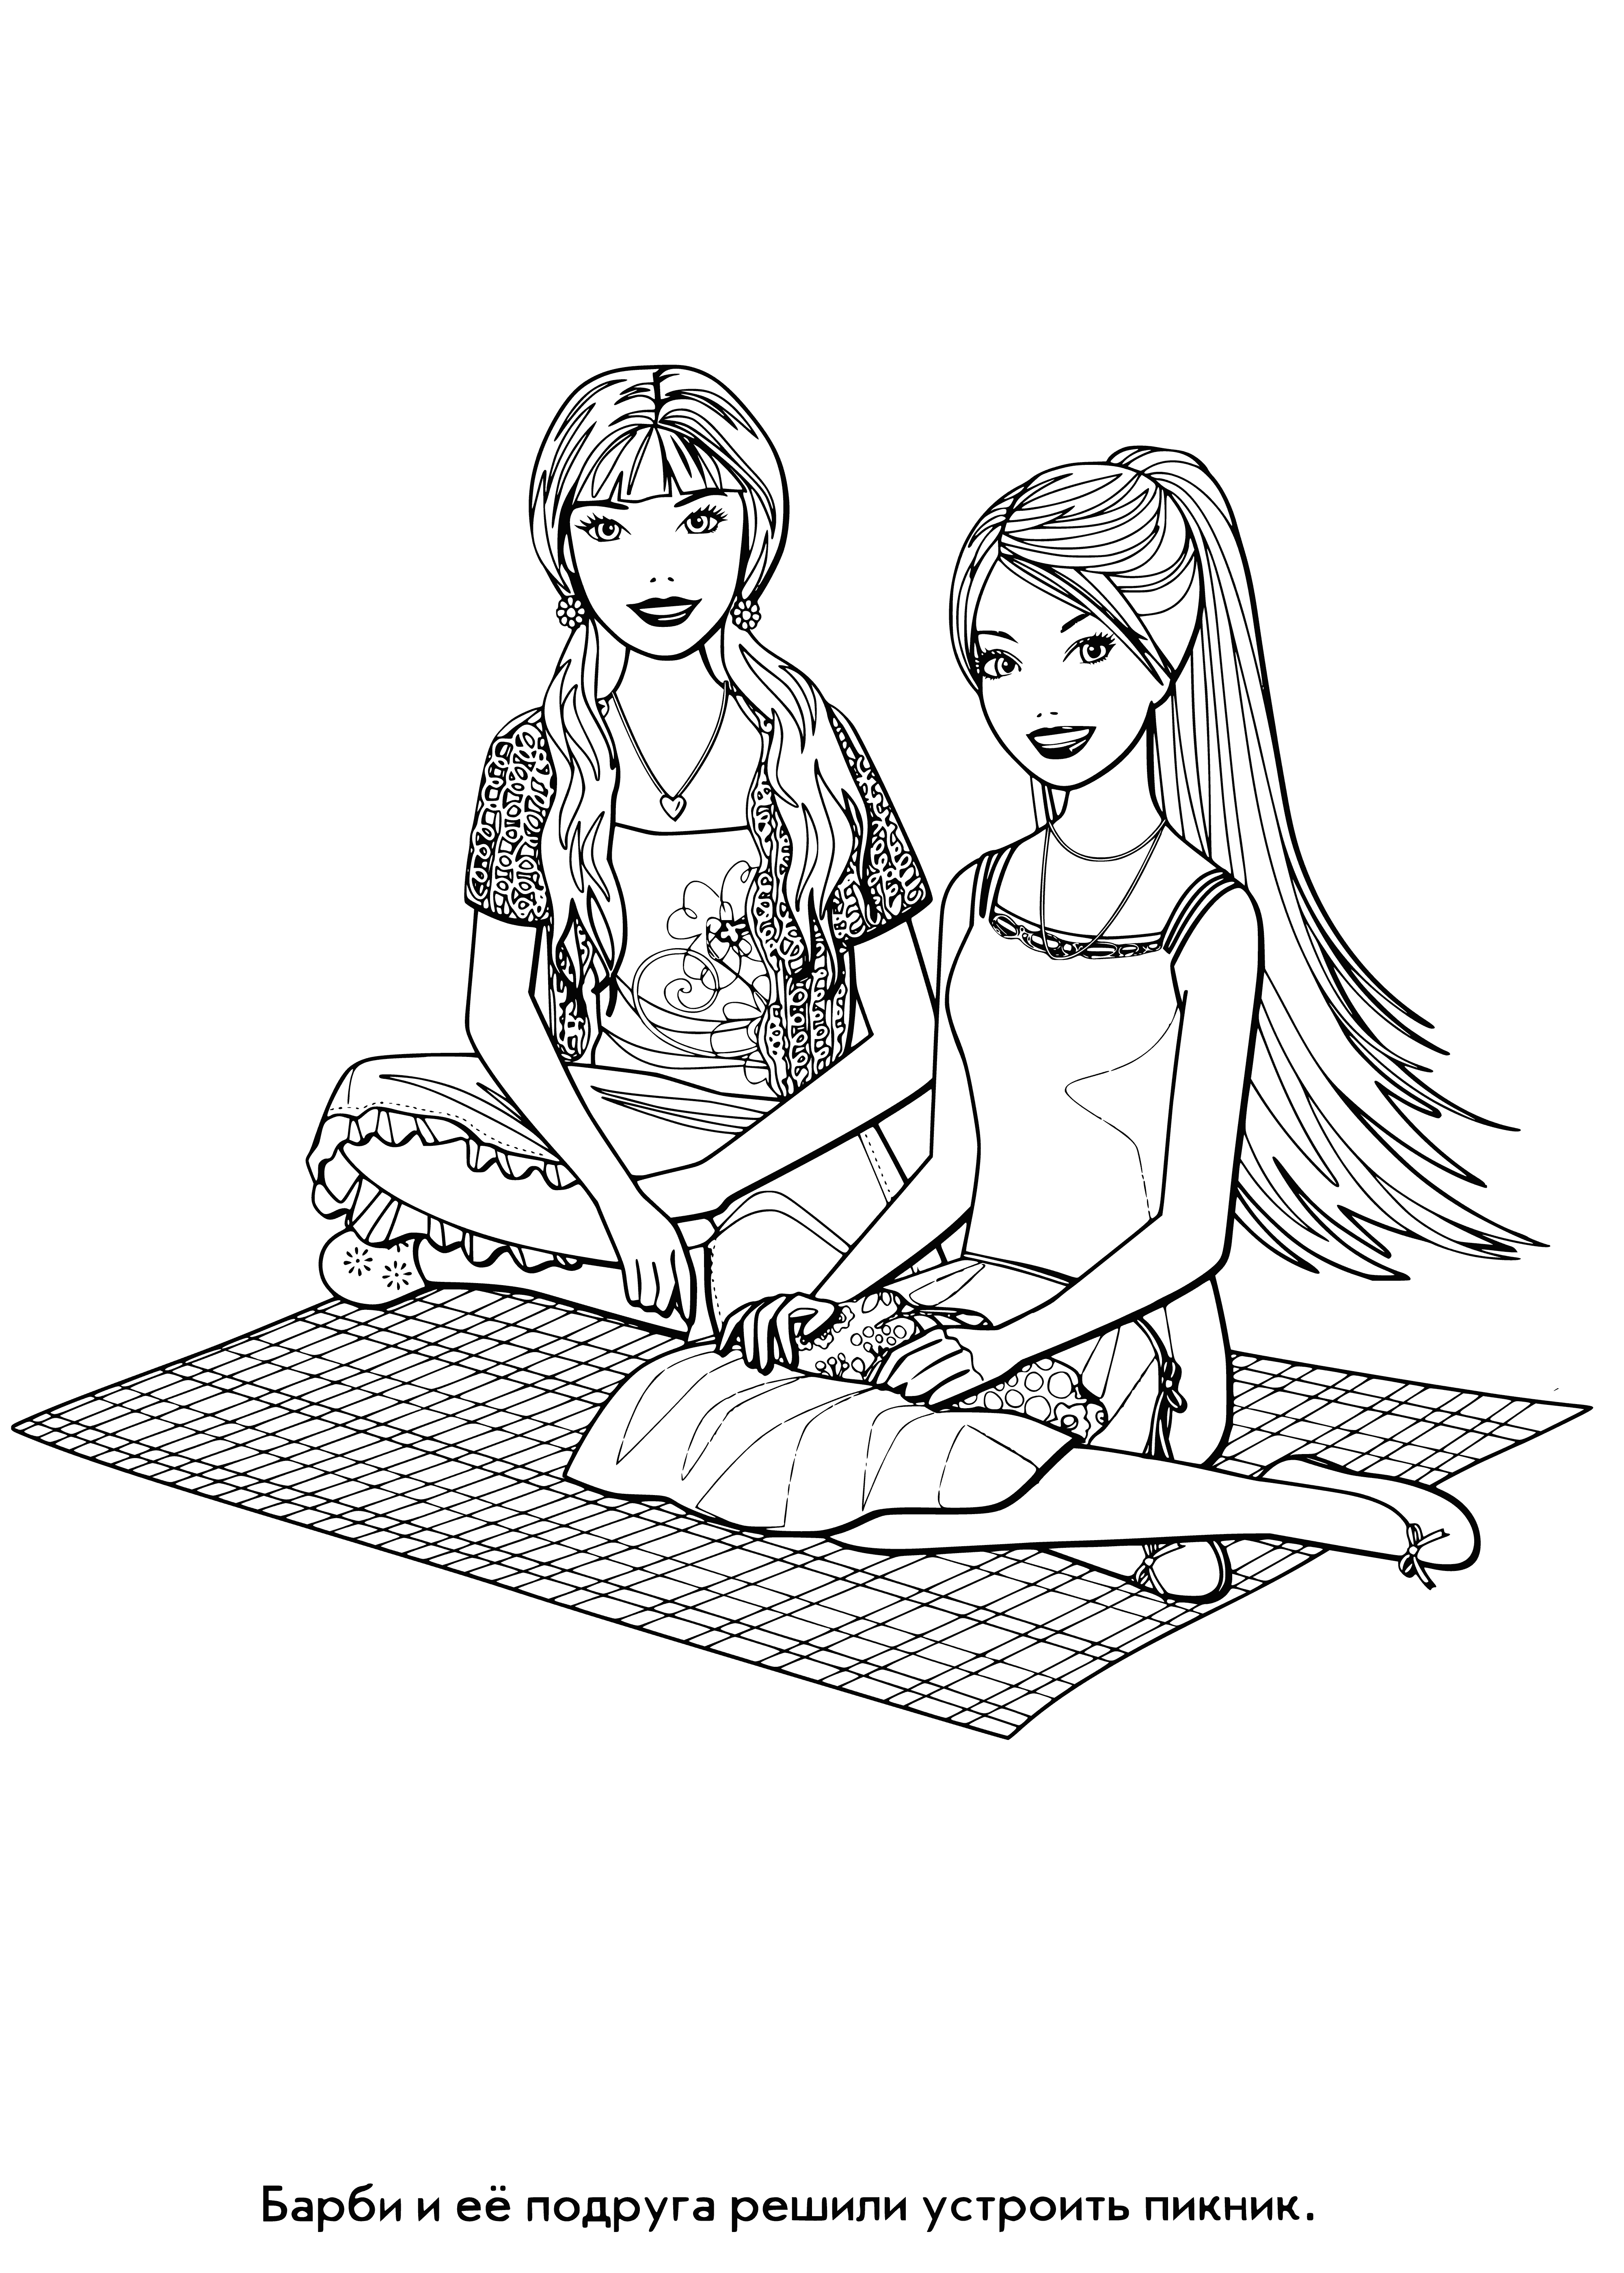 coloring page: Barbie sits on a checkered blanket with a picnic feast; green ground, trees in the distance.